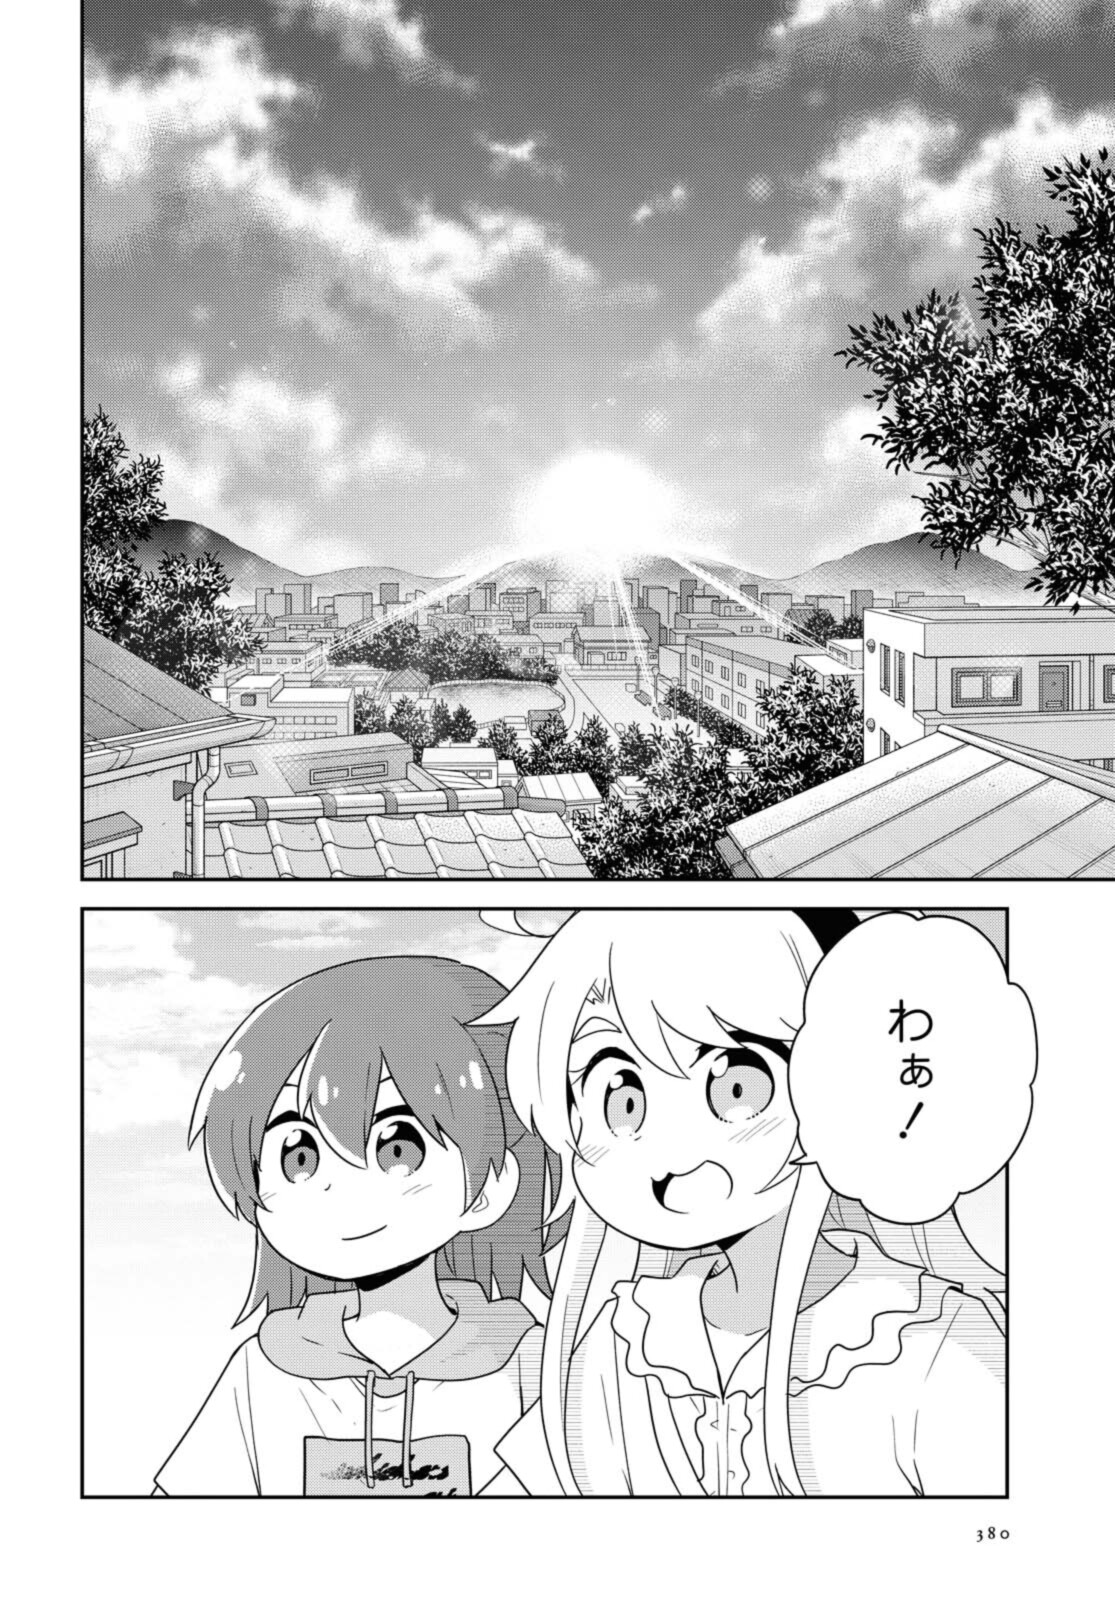 Wataten! An Angel Flew Down to Me 私に天使が舞い降りた！ 第86.2話 - Page 9